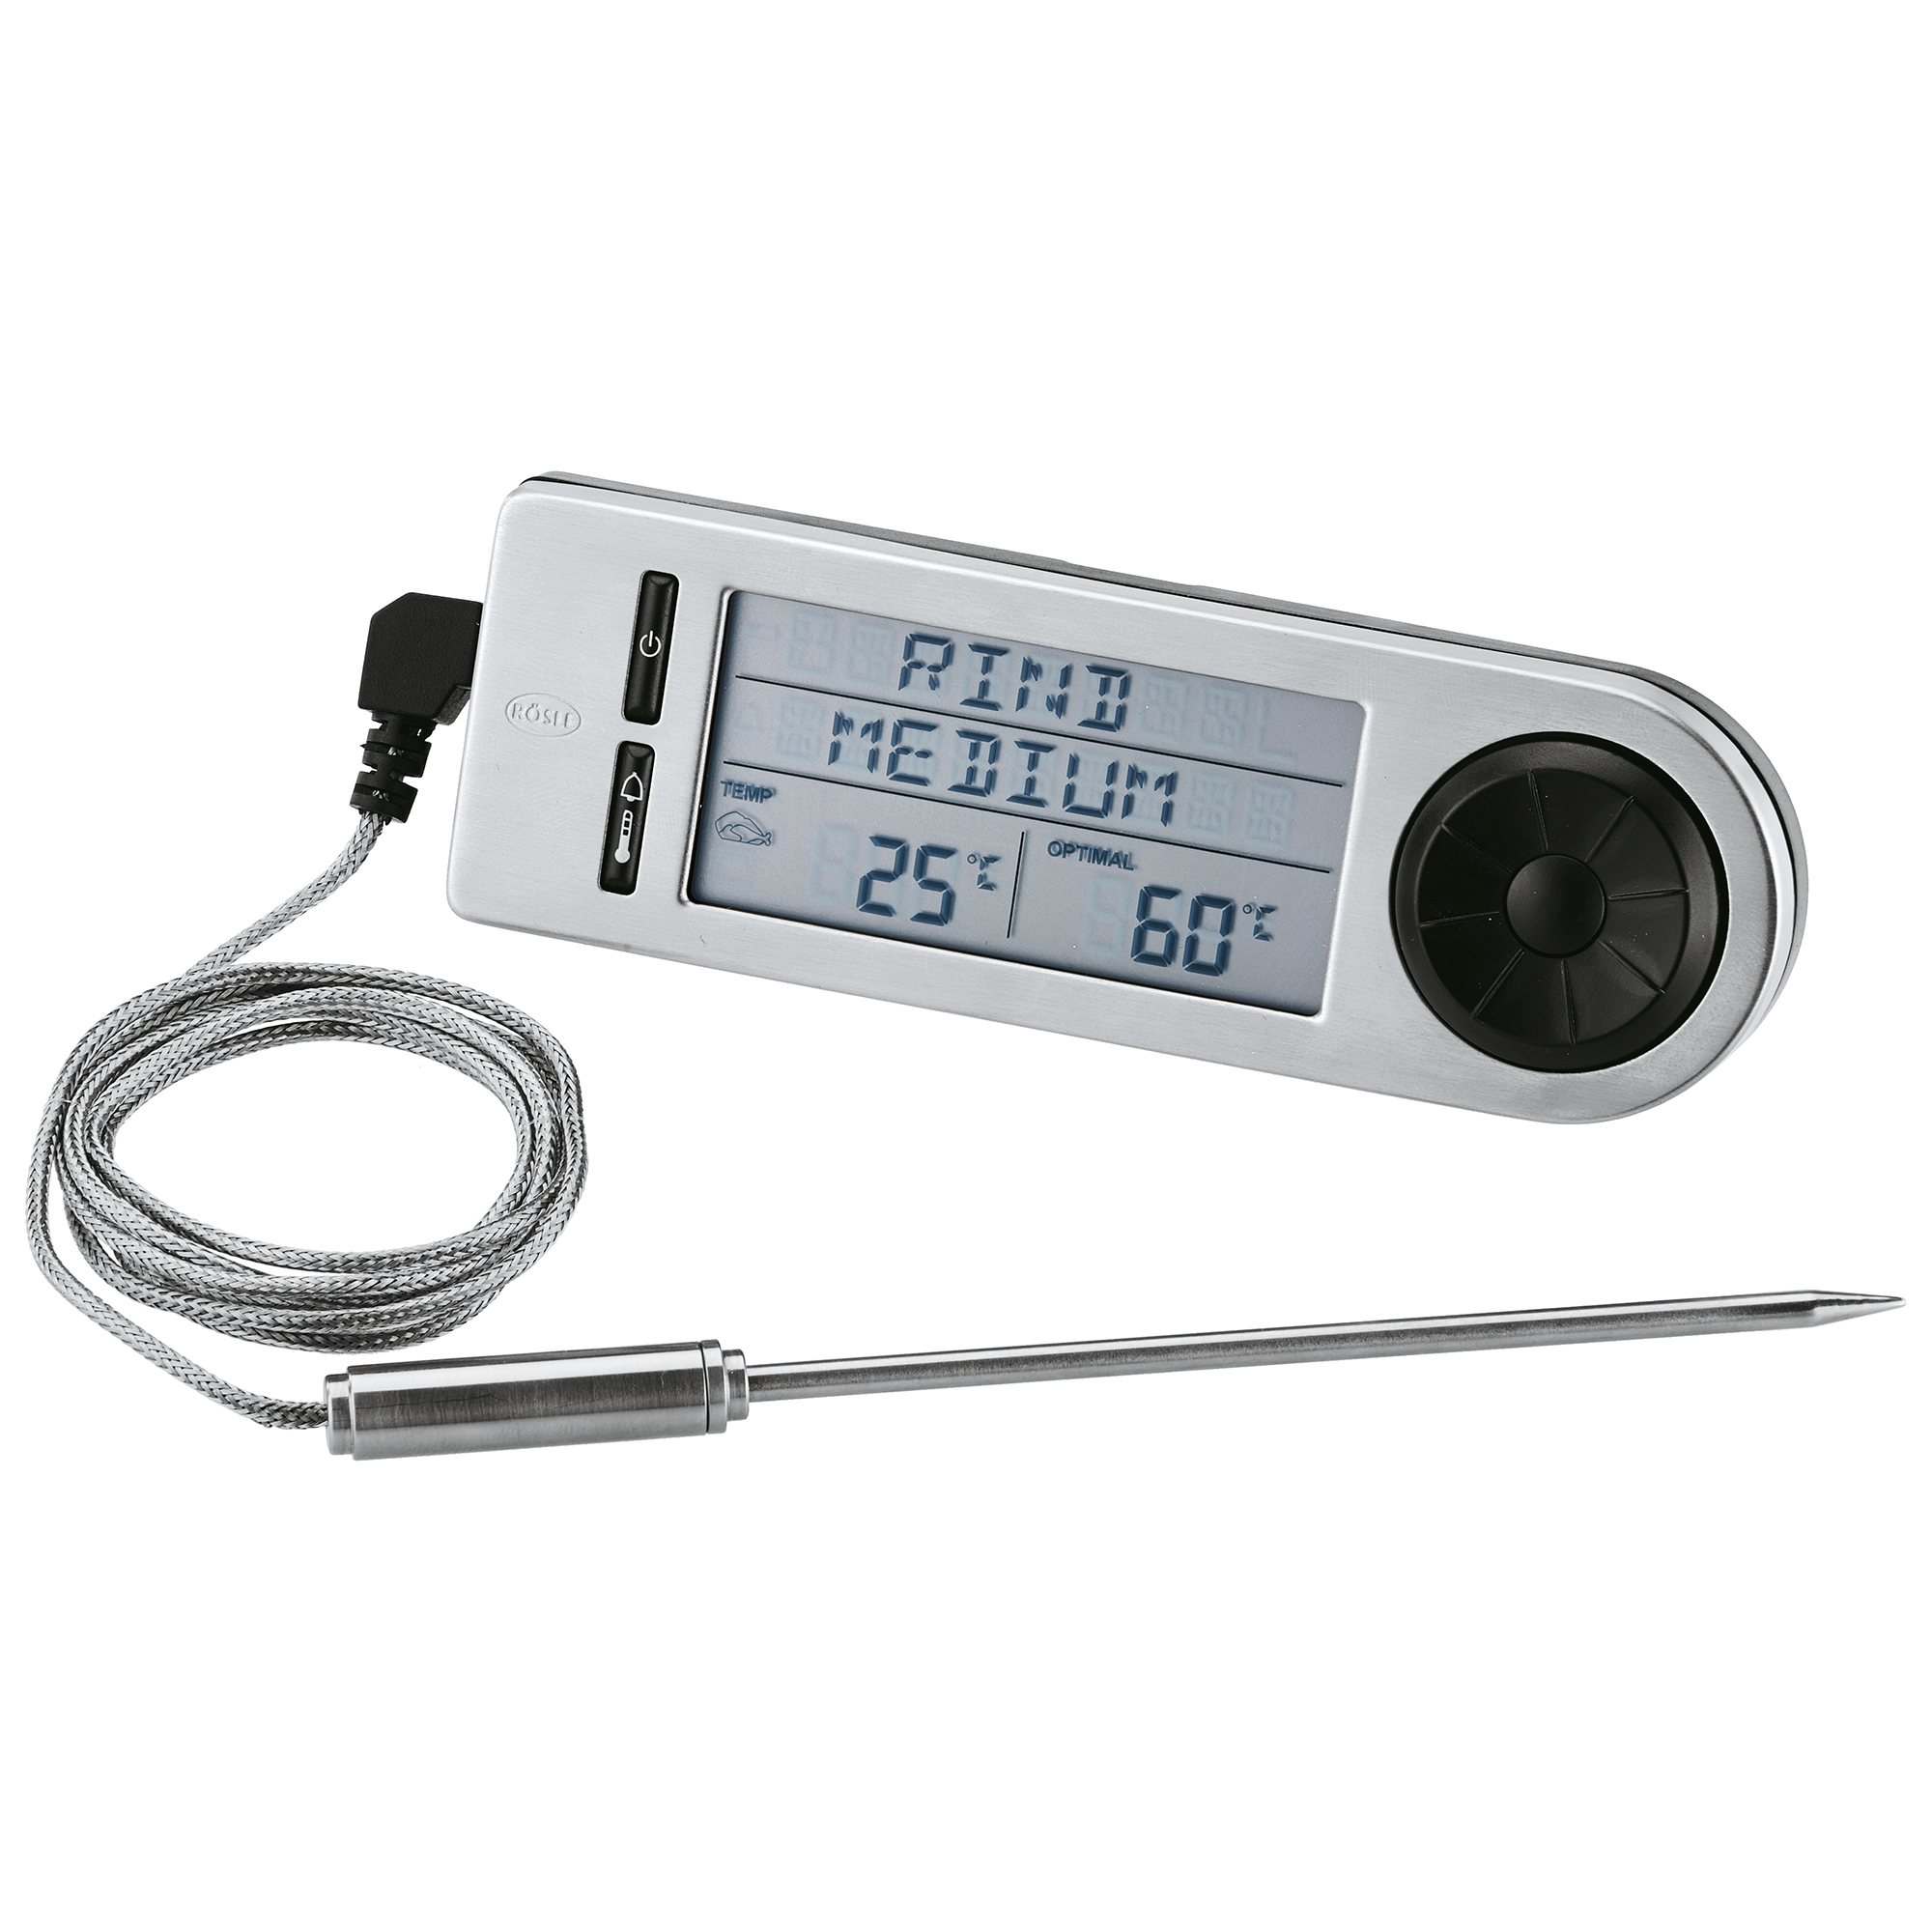 Barbecue Thermometer Bratenthermometer Grillthermometer Edelstahl BBQ-Gasgrill_ 